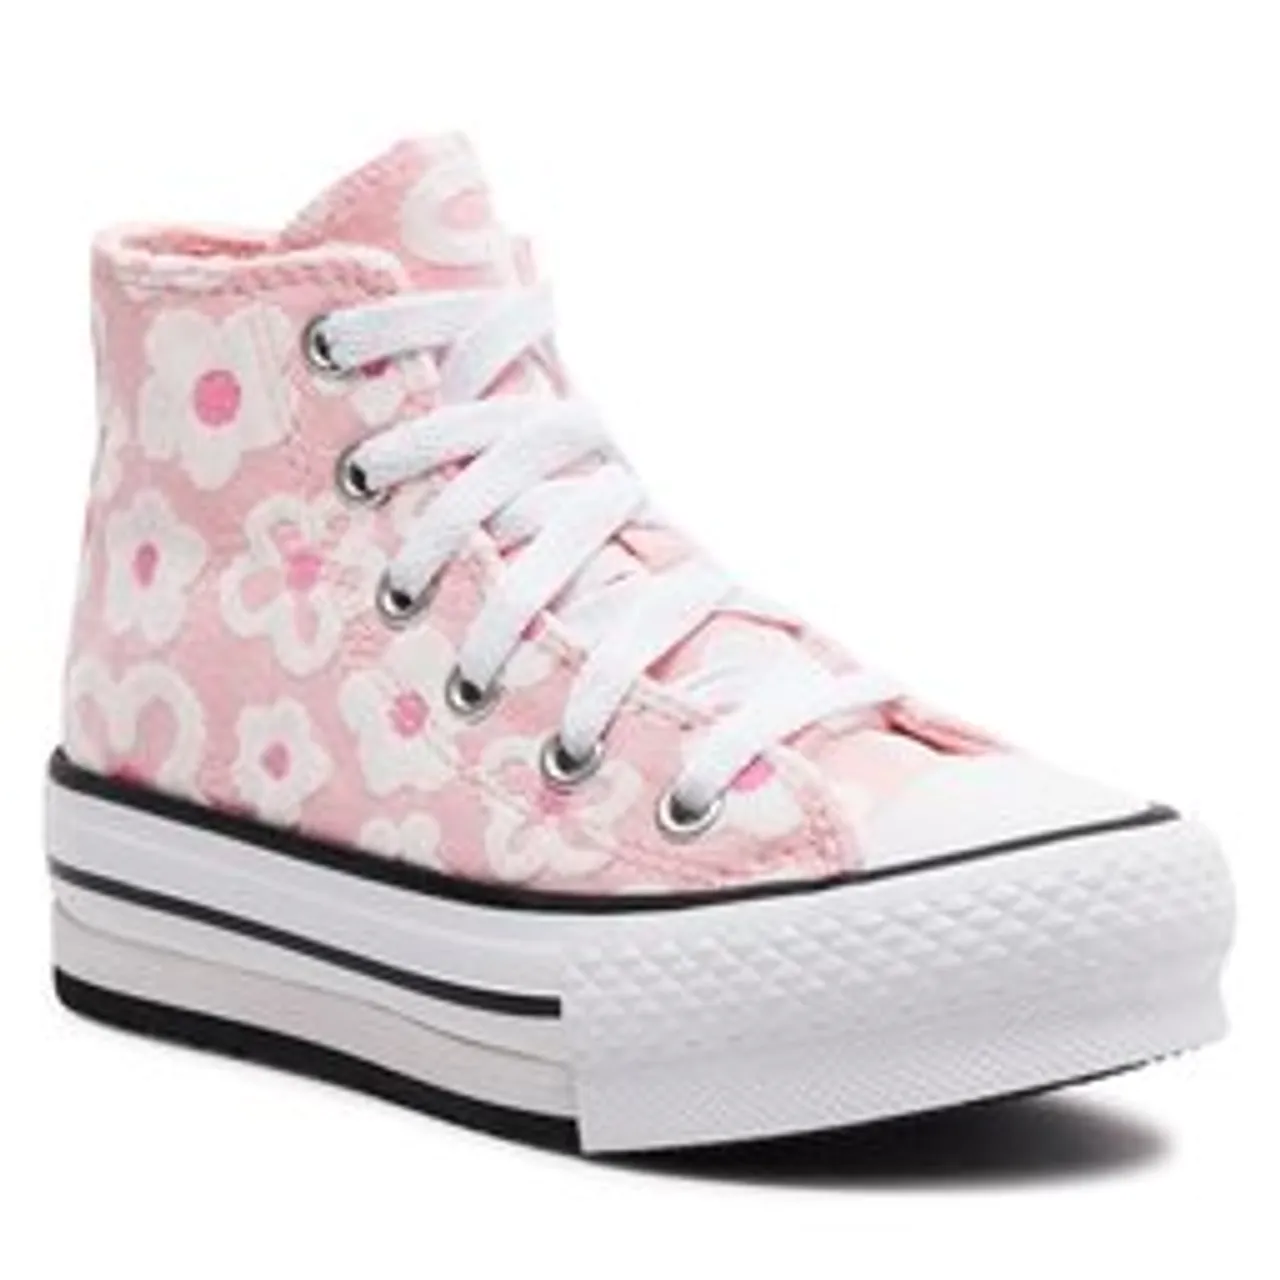 Sneakers aus Stoff Converse Chuck Taylor All Star Lift Platform Floral Embroidery A06325C Donut Glaze/Oops Pink/White